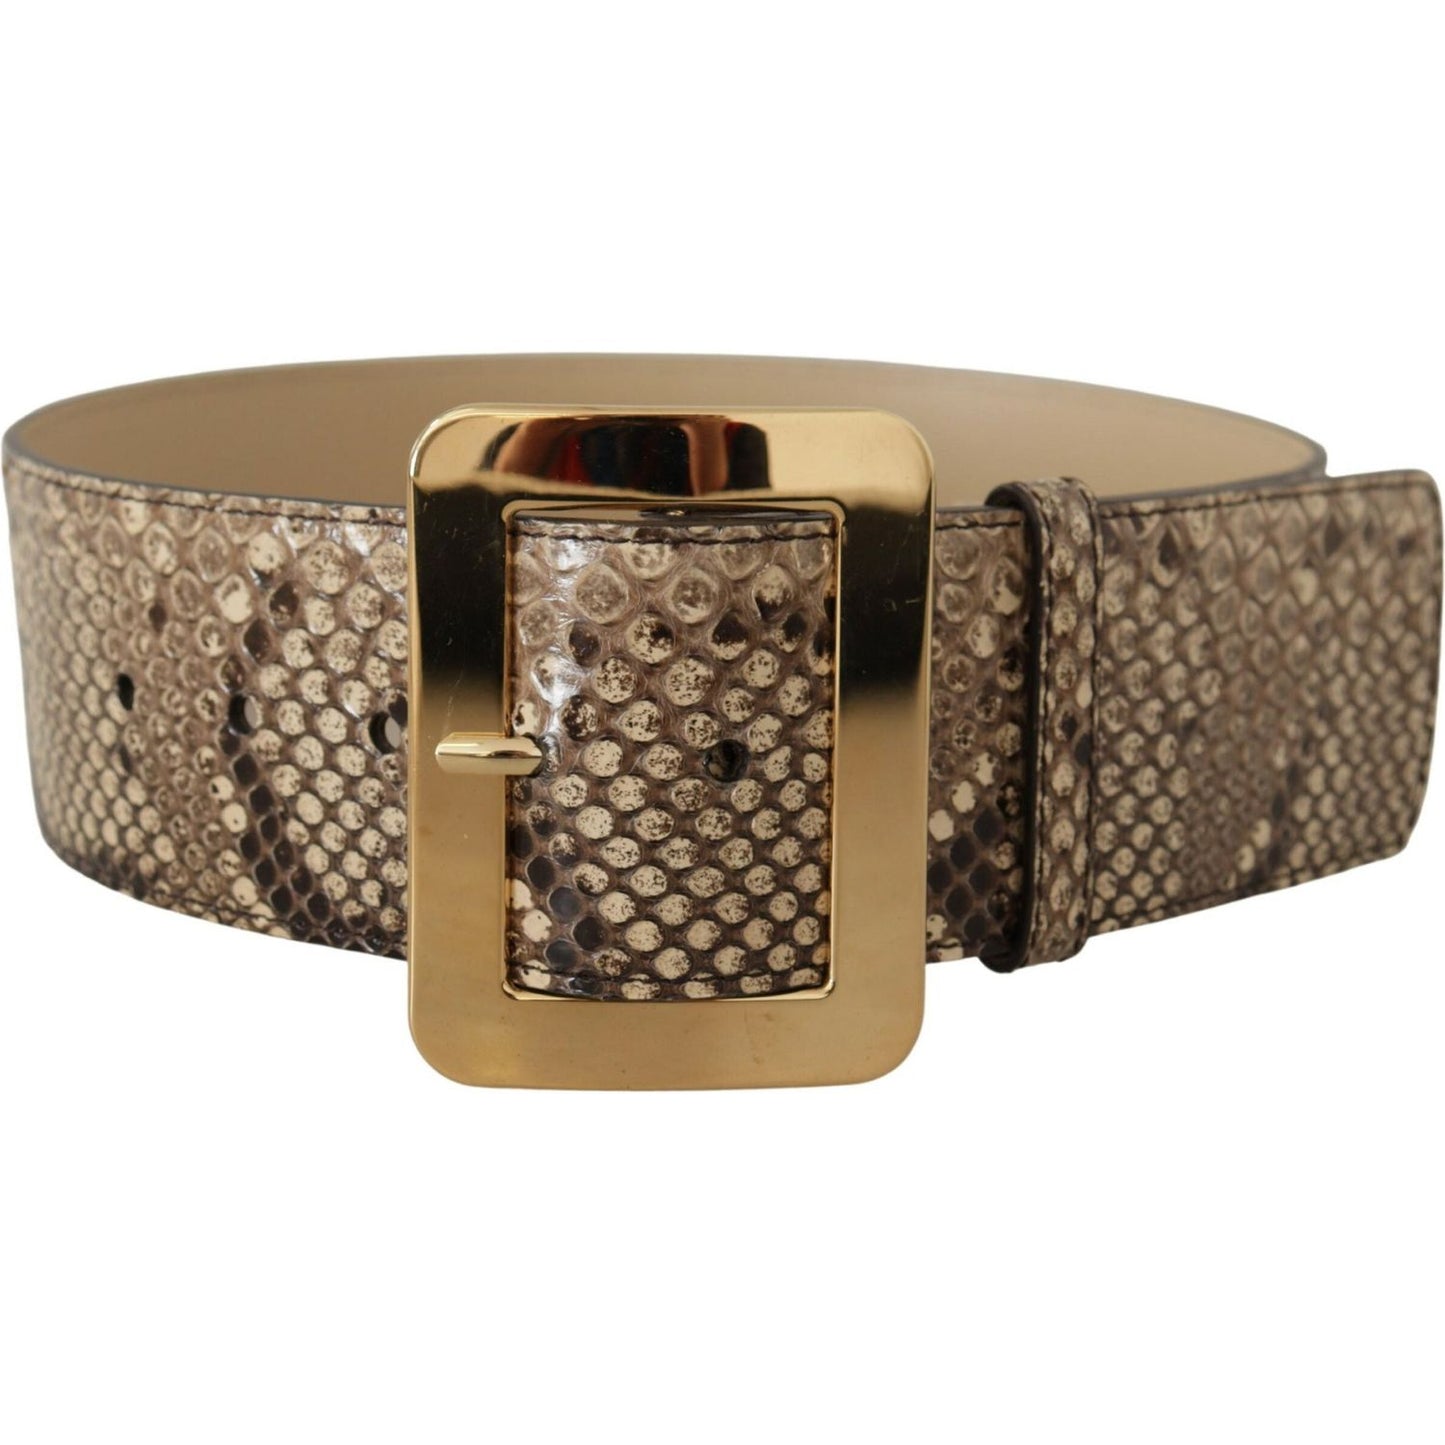 Dolce & Gabbana Brown Exotic Wide Waist Leather Gold Metal Buckle Belt brown-exotic-wide-waist-leather-gold-metal-buckle-belt IMG_9048-scaled-ae751873-496.jpg